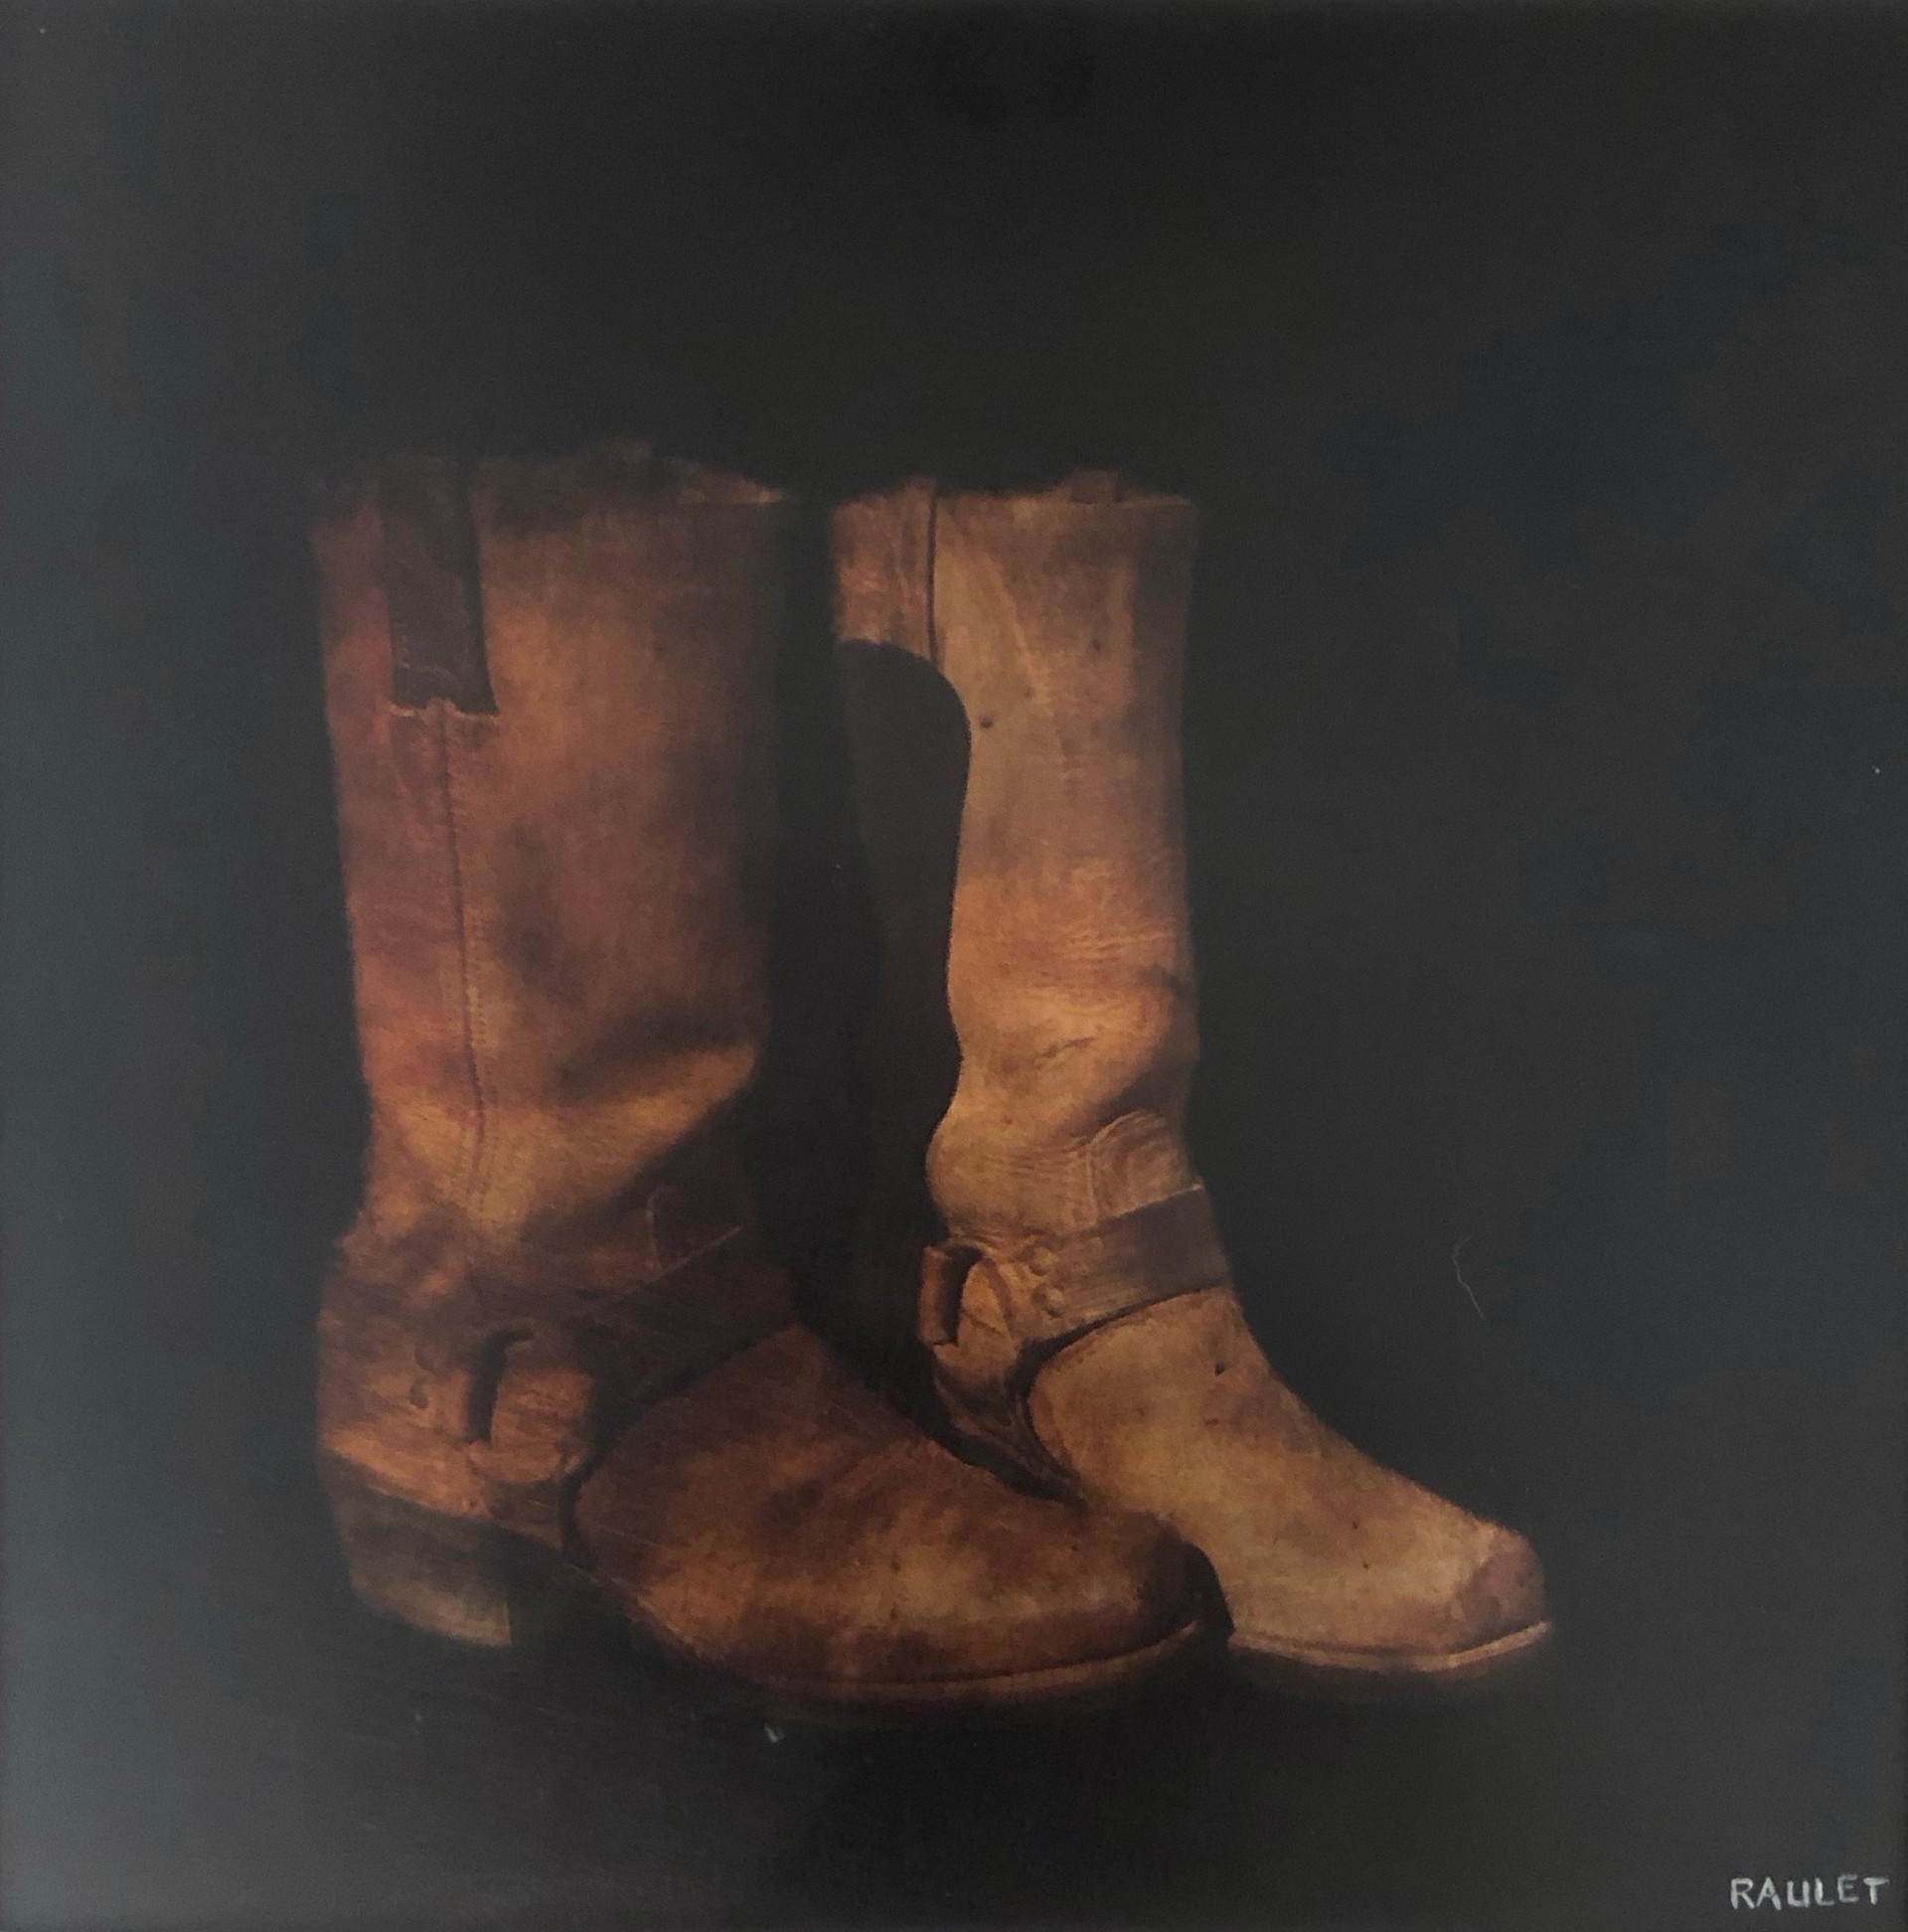 These Boots Were Made For Walkin' by Dawne Raulet